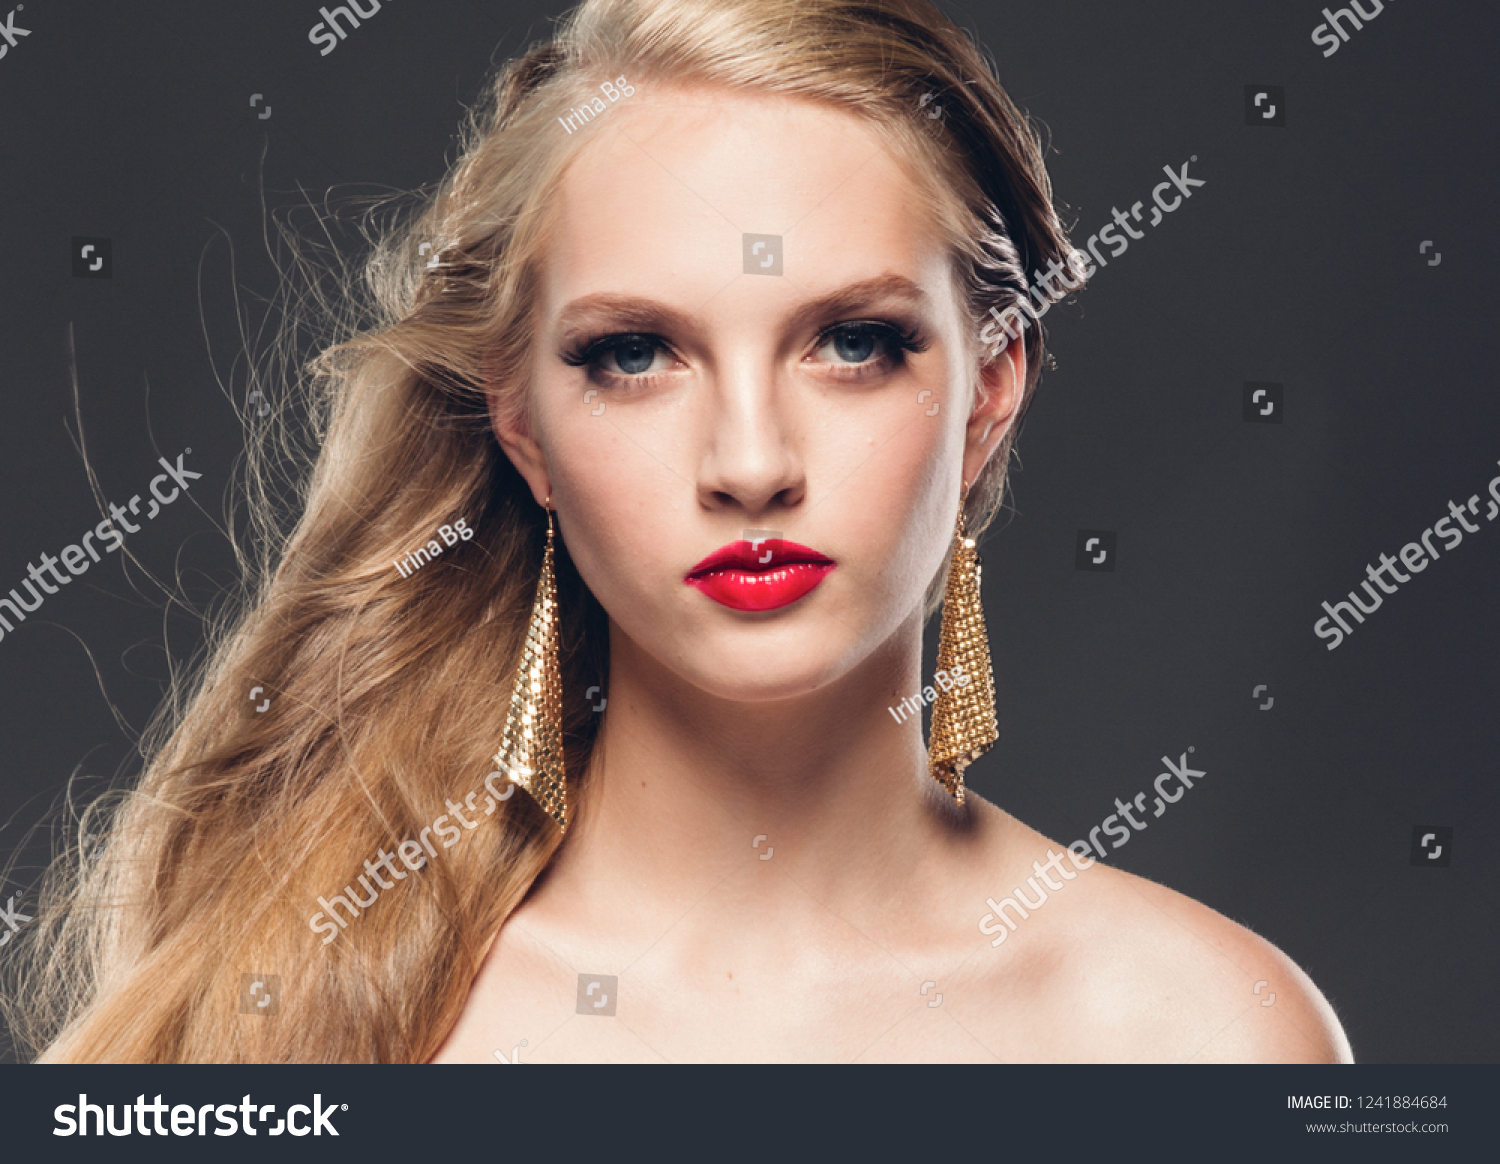 Beautiful Woman Long Blonde Hair Red Stock Photo Edit Now 1241884684